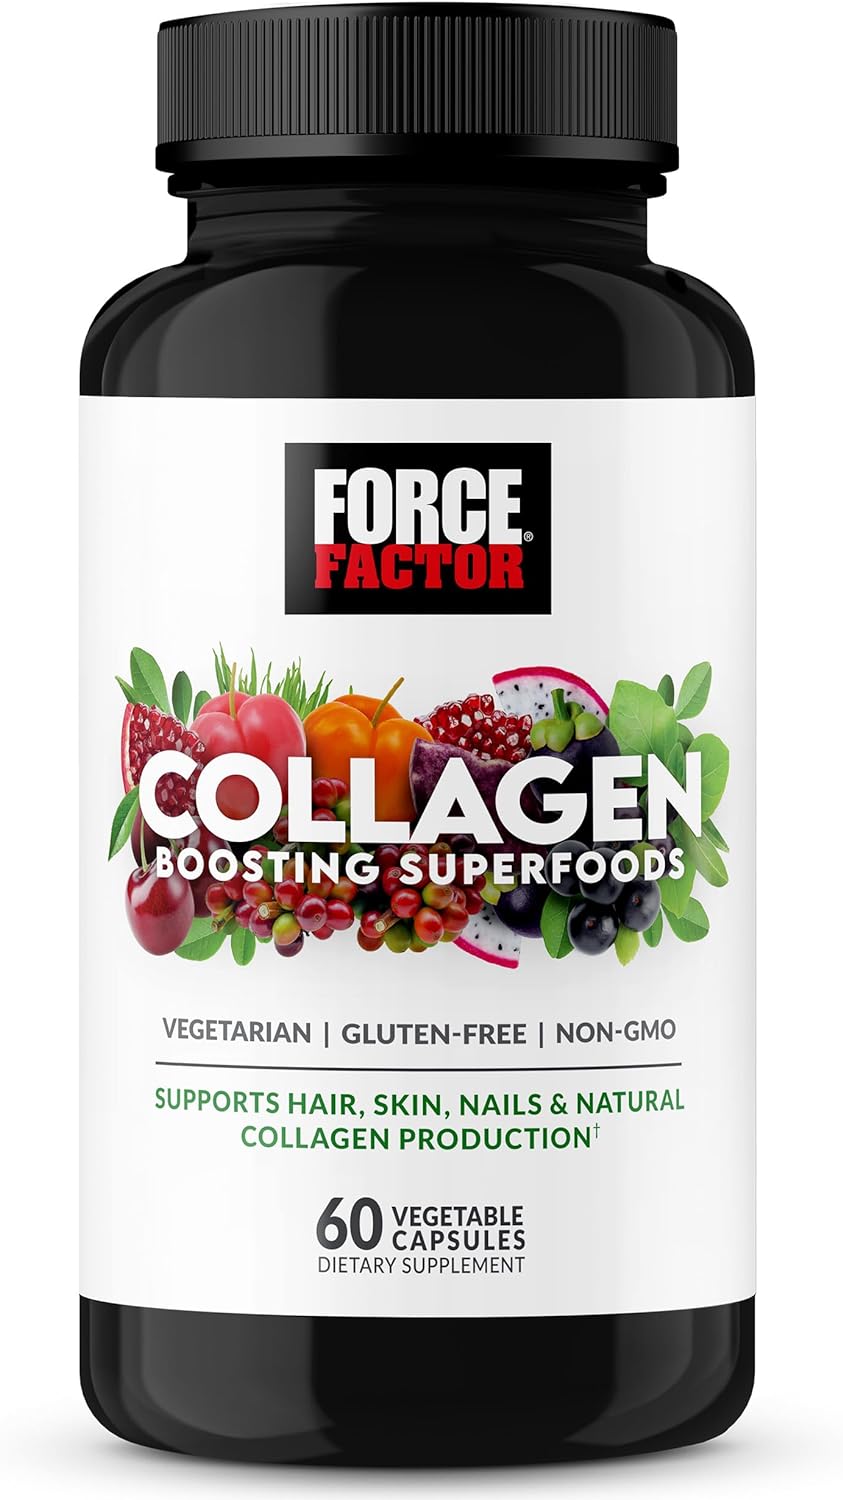 Force Factor Collagen Boosting Superfoods with Biotin, Hyaluronic Acid, Bamboo, and Hair, Skin, and Nails Vitamins, Nail Strengthener and Skin Supplement, 60 Vegetable Capsules